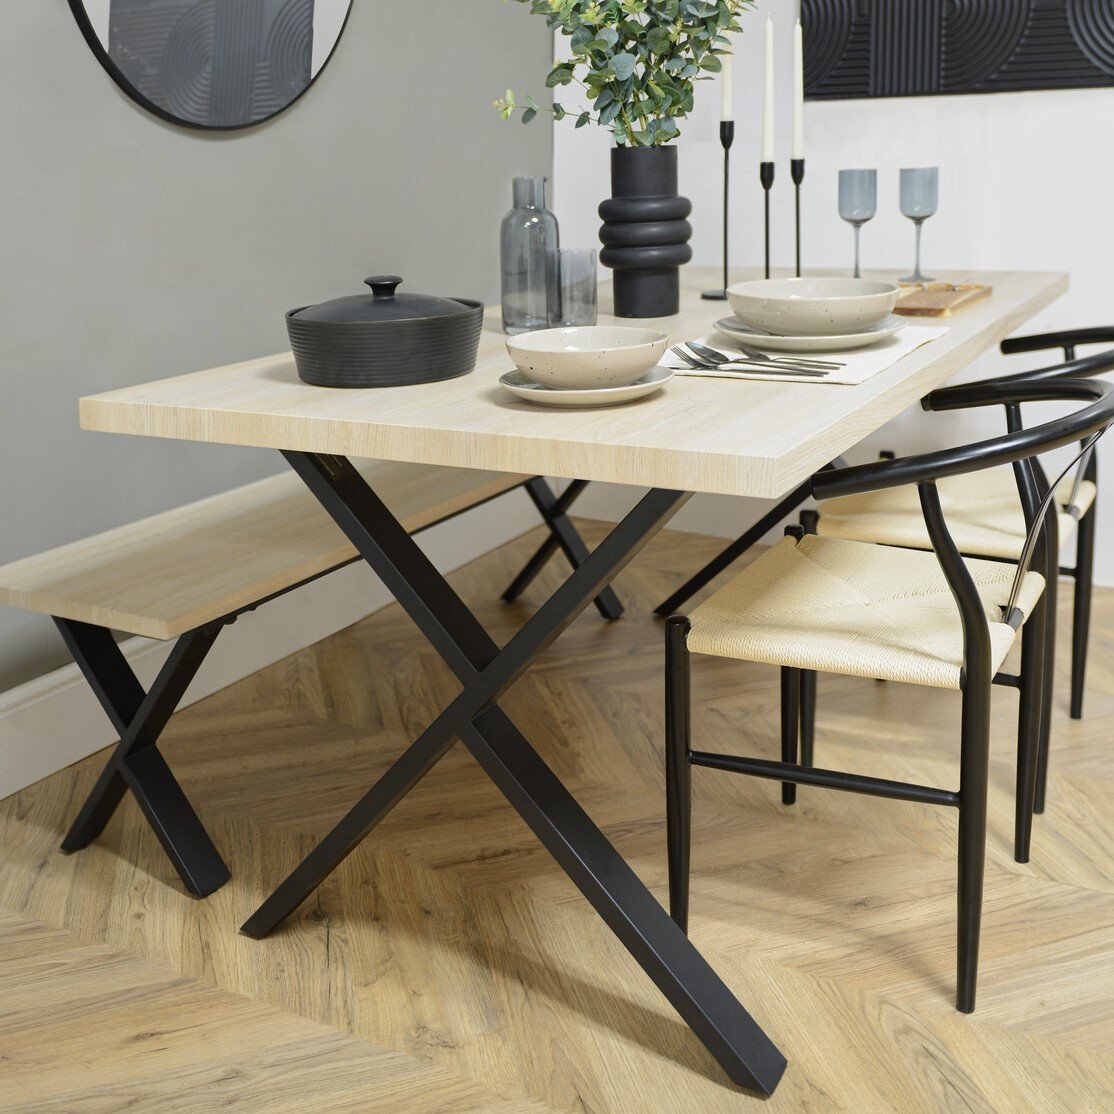 Ashford Wooden 4 Seater Dining Table Natural Oak and Black Image